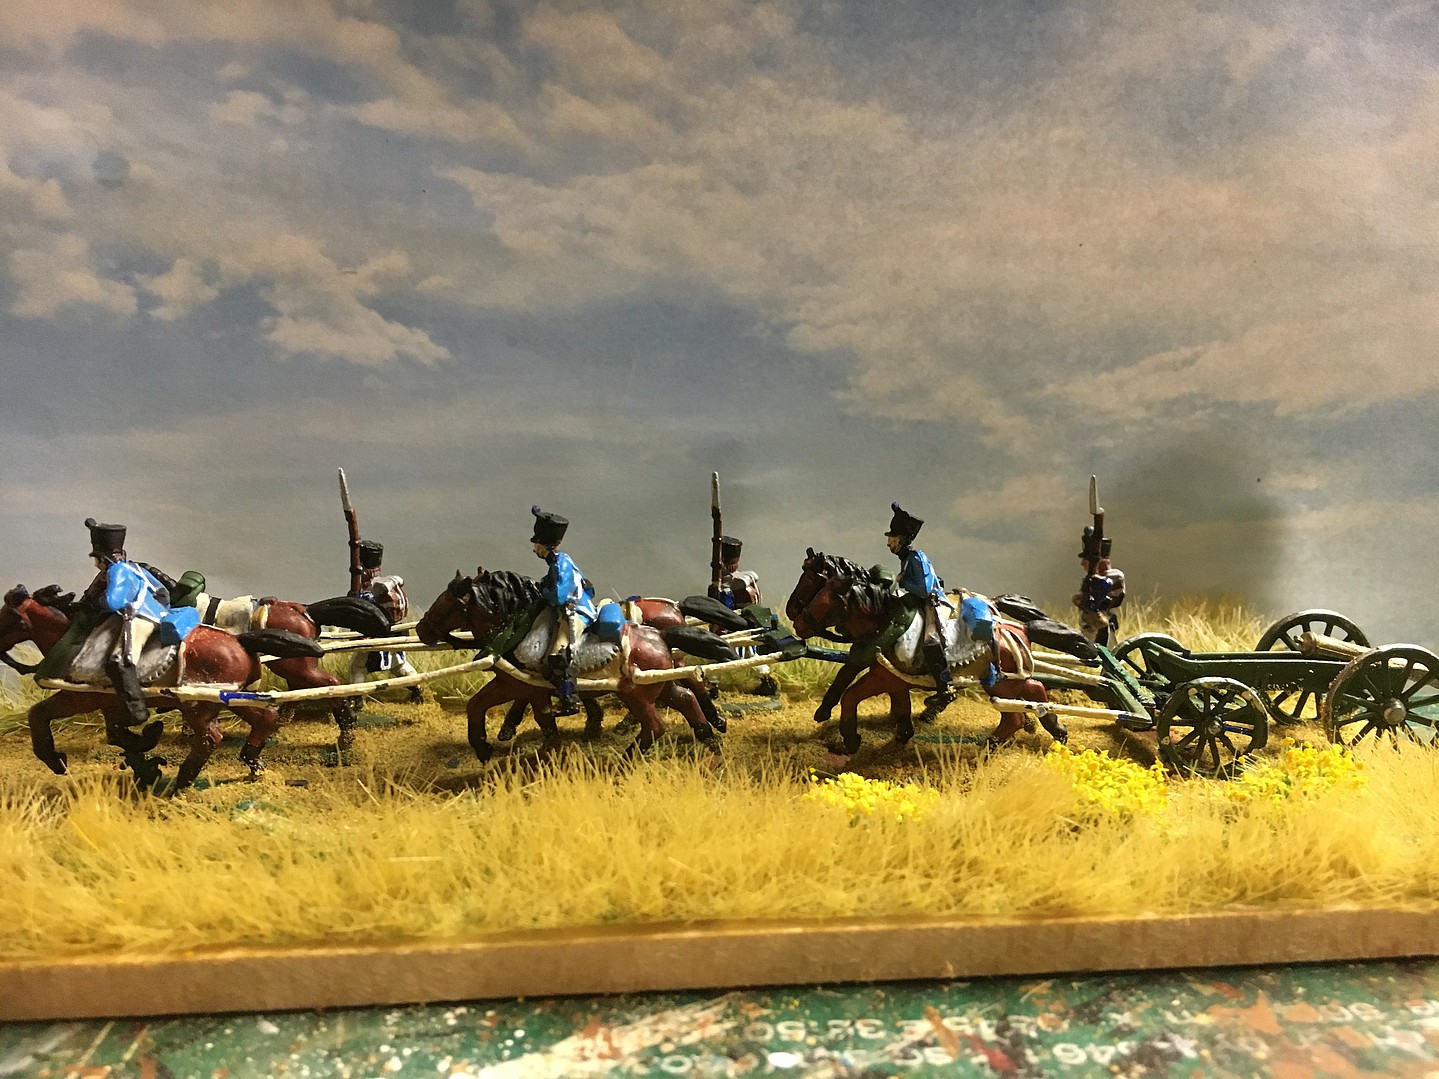 HAT 1/72-8105 Napoleonic French 6 Horse Limber Team x 3 Box out of catalog 